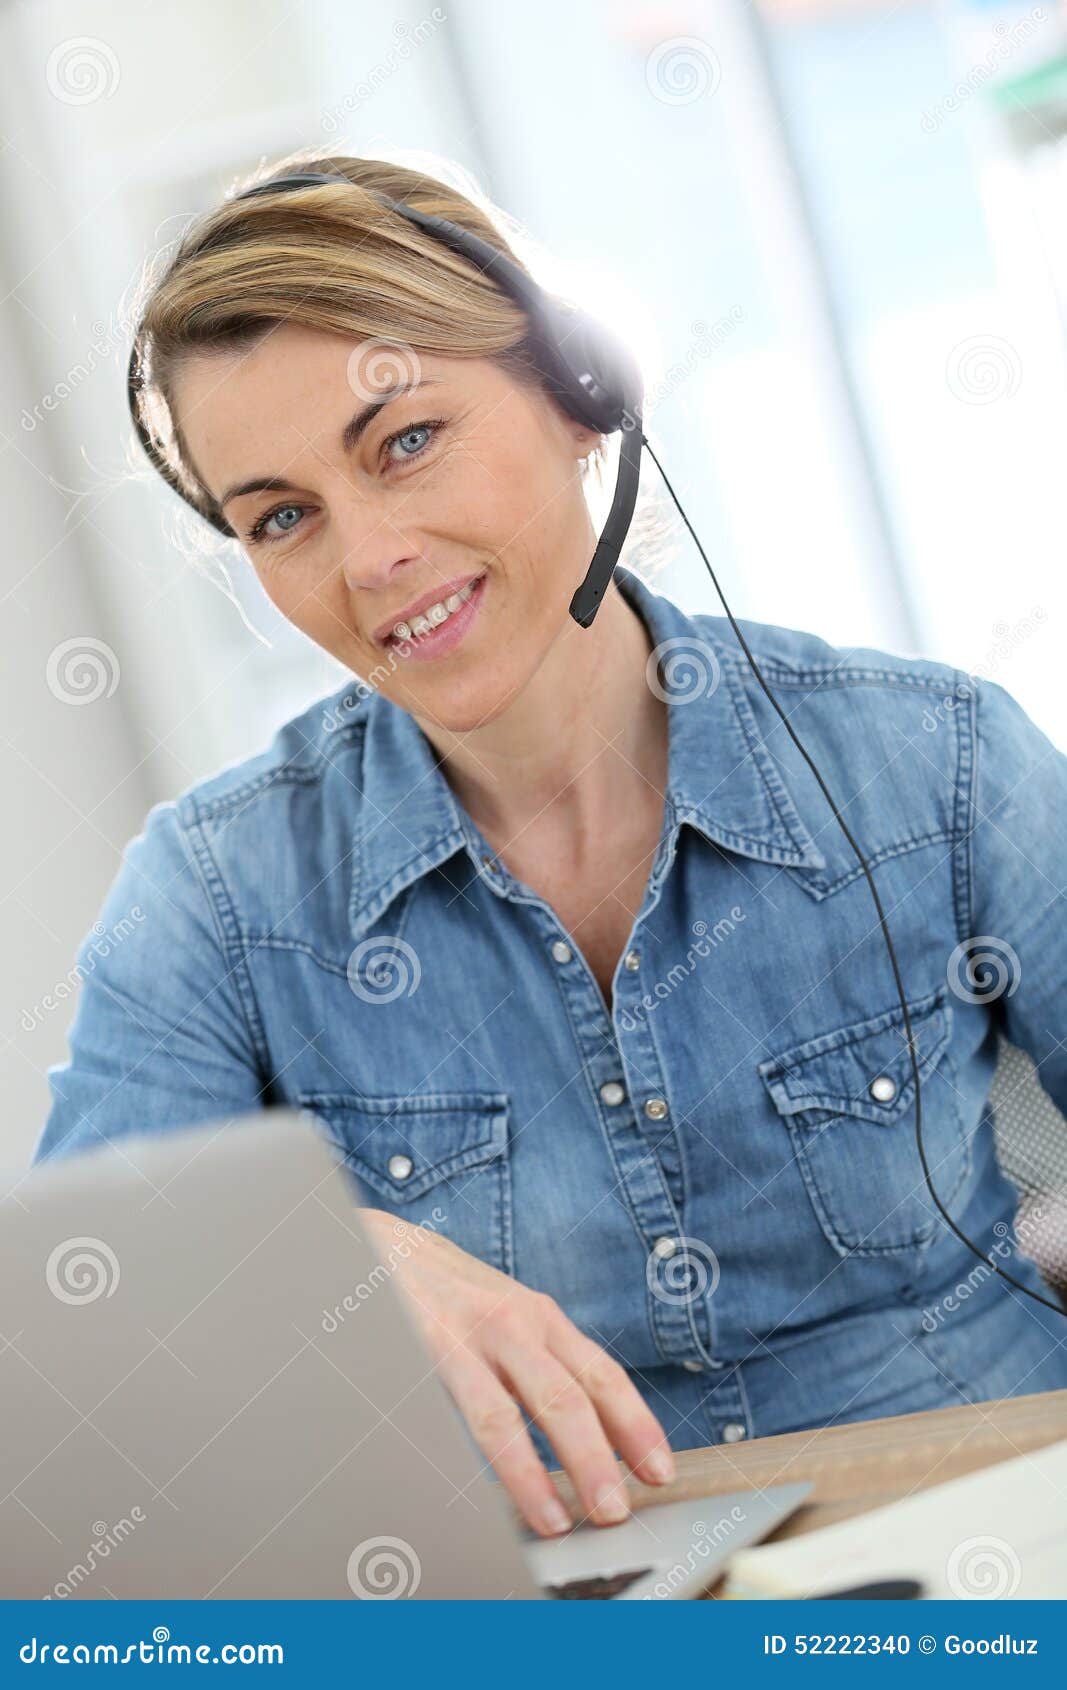 active woman teleworking from home with headphones